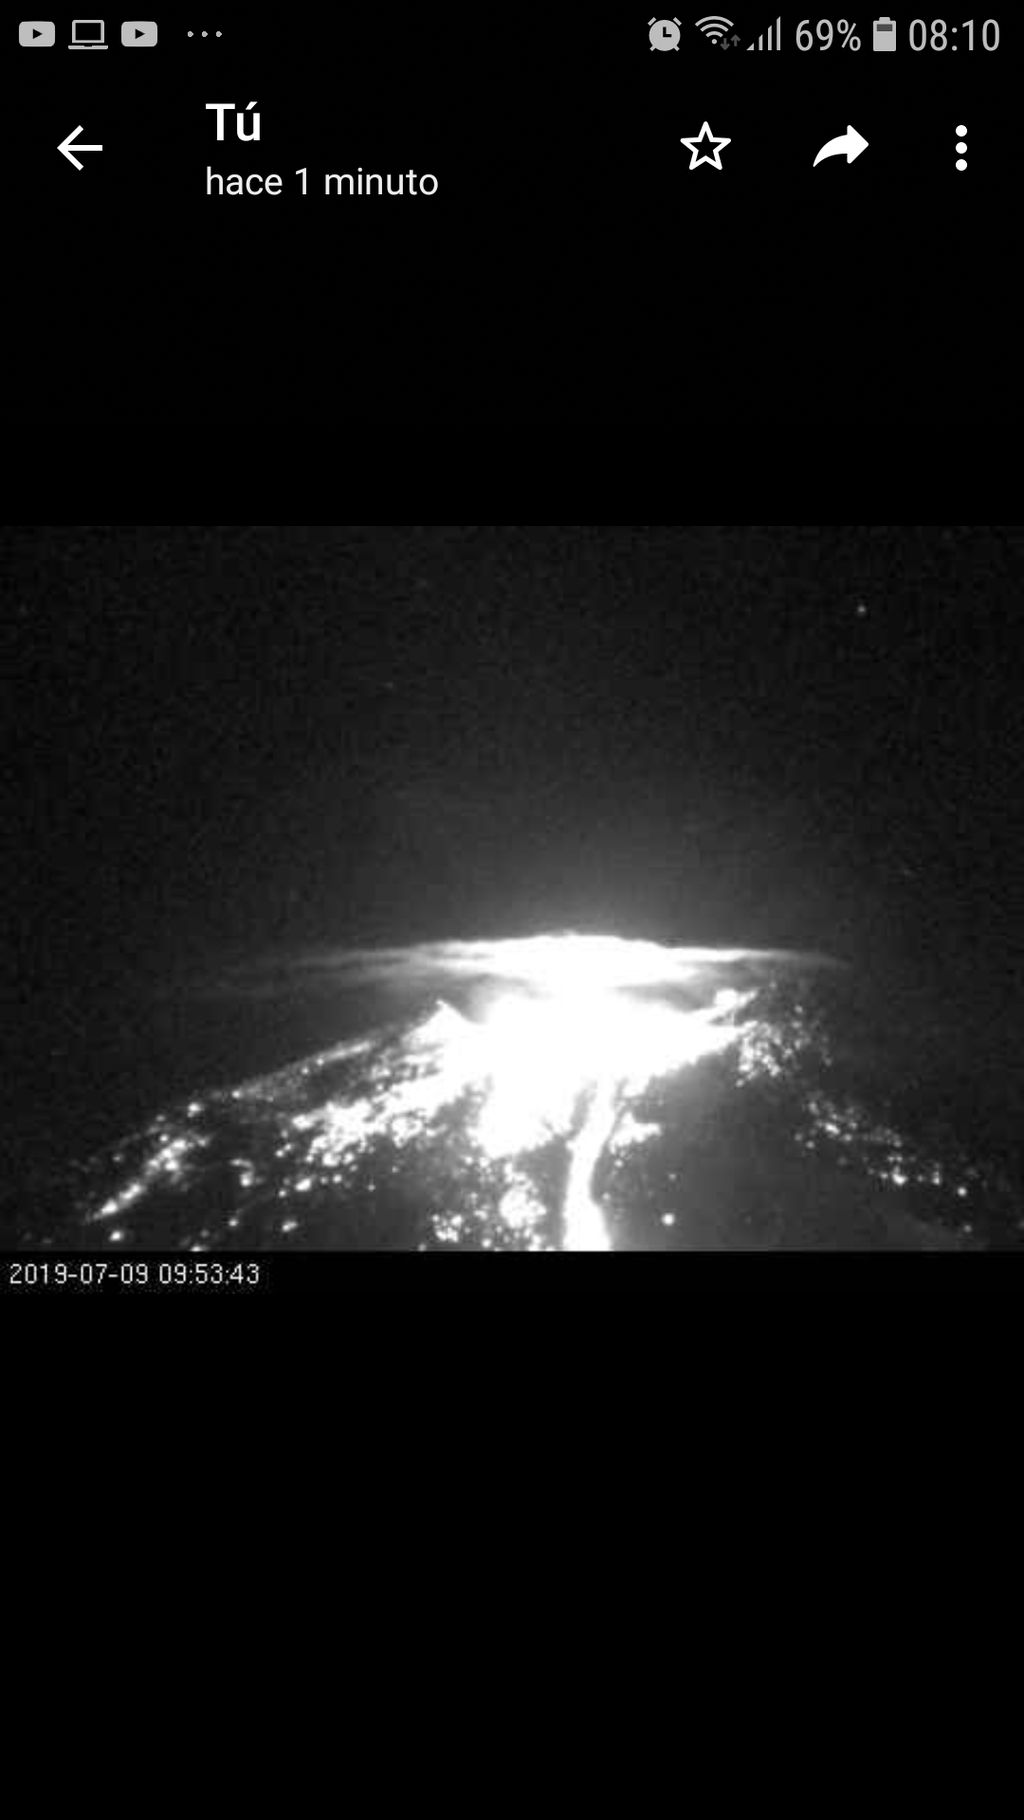 Eruption of Nevados de Chillán volcano yesterday morning (image: webcam capture, submitted by user)